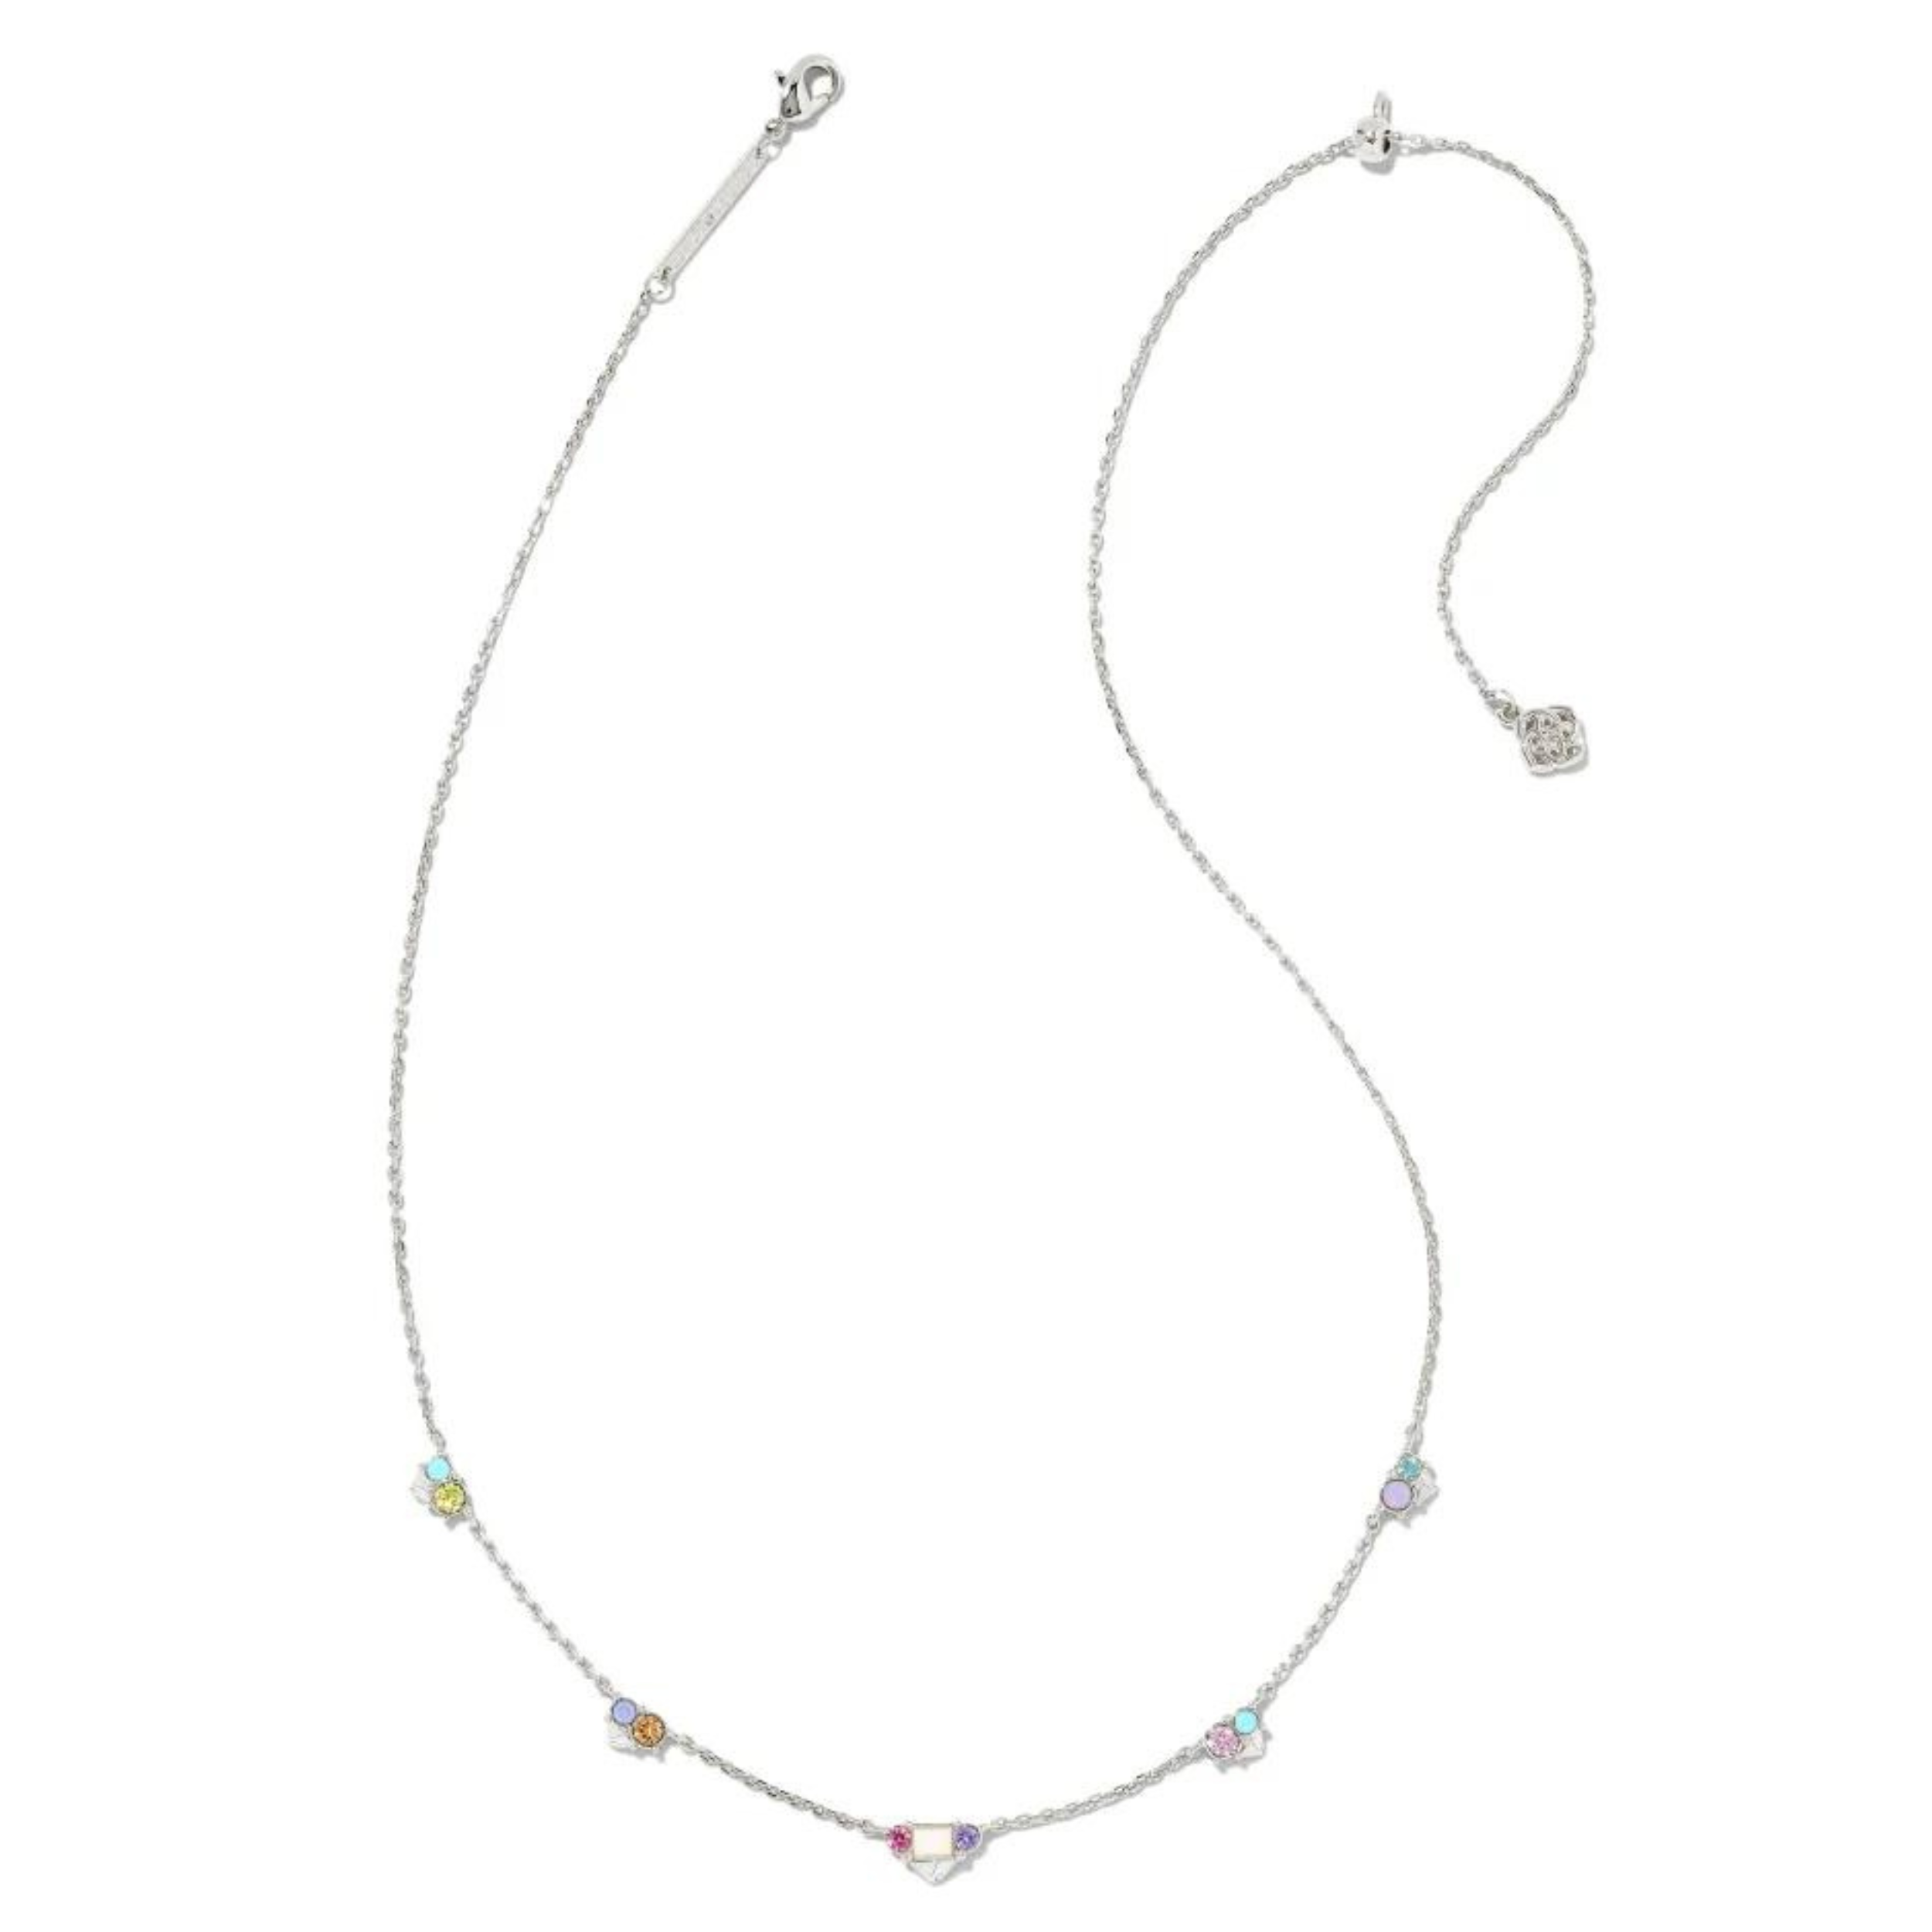 Silver necklace with pastel crystals, pictured on a white background.